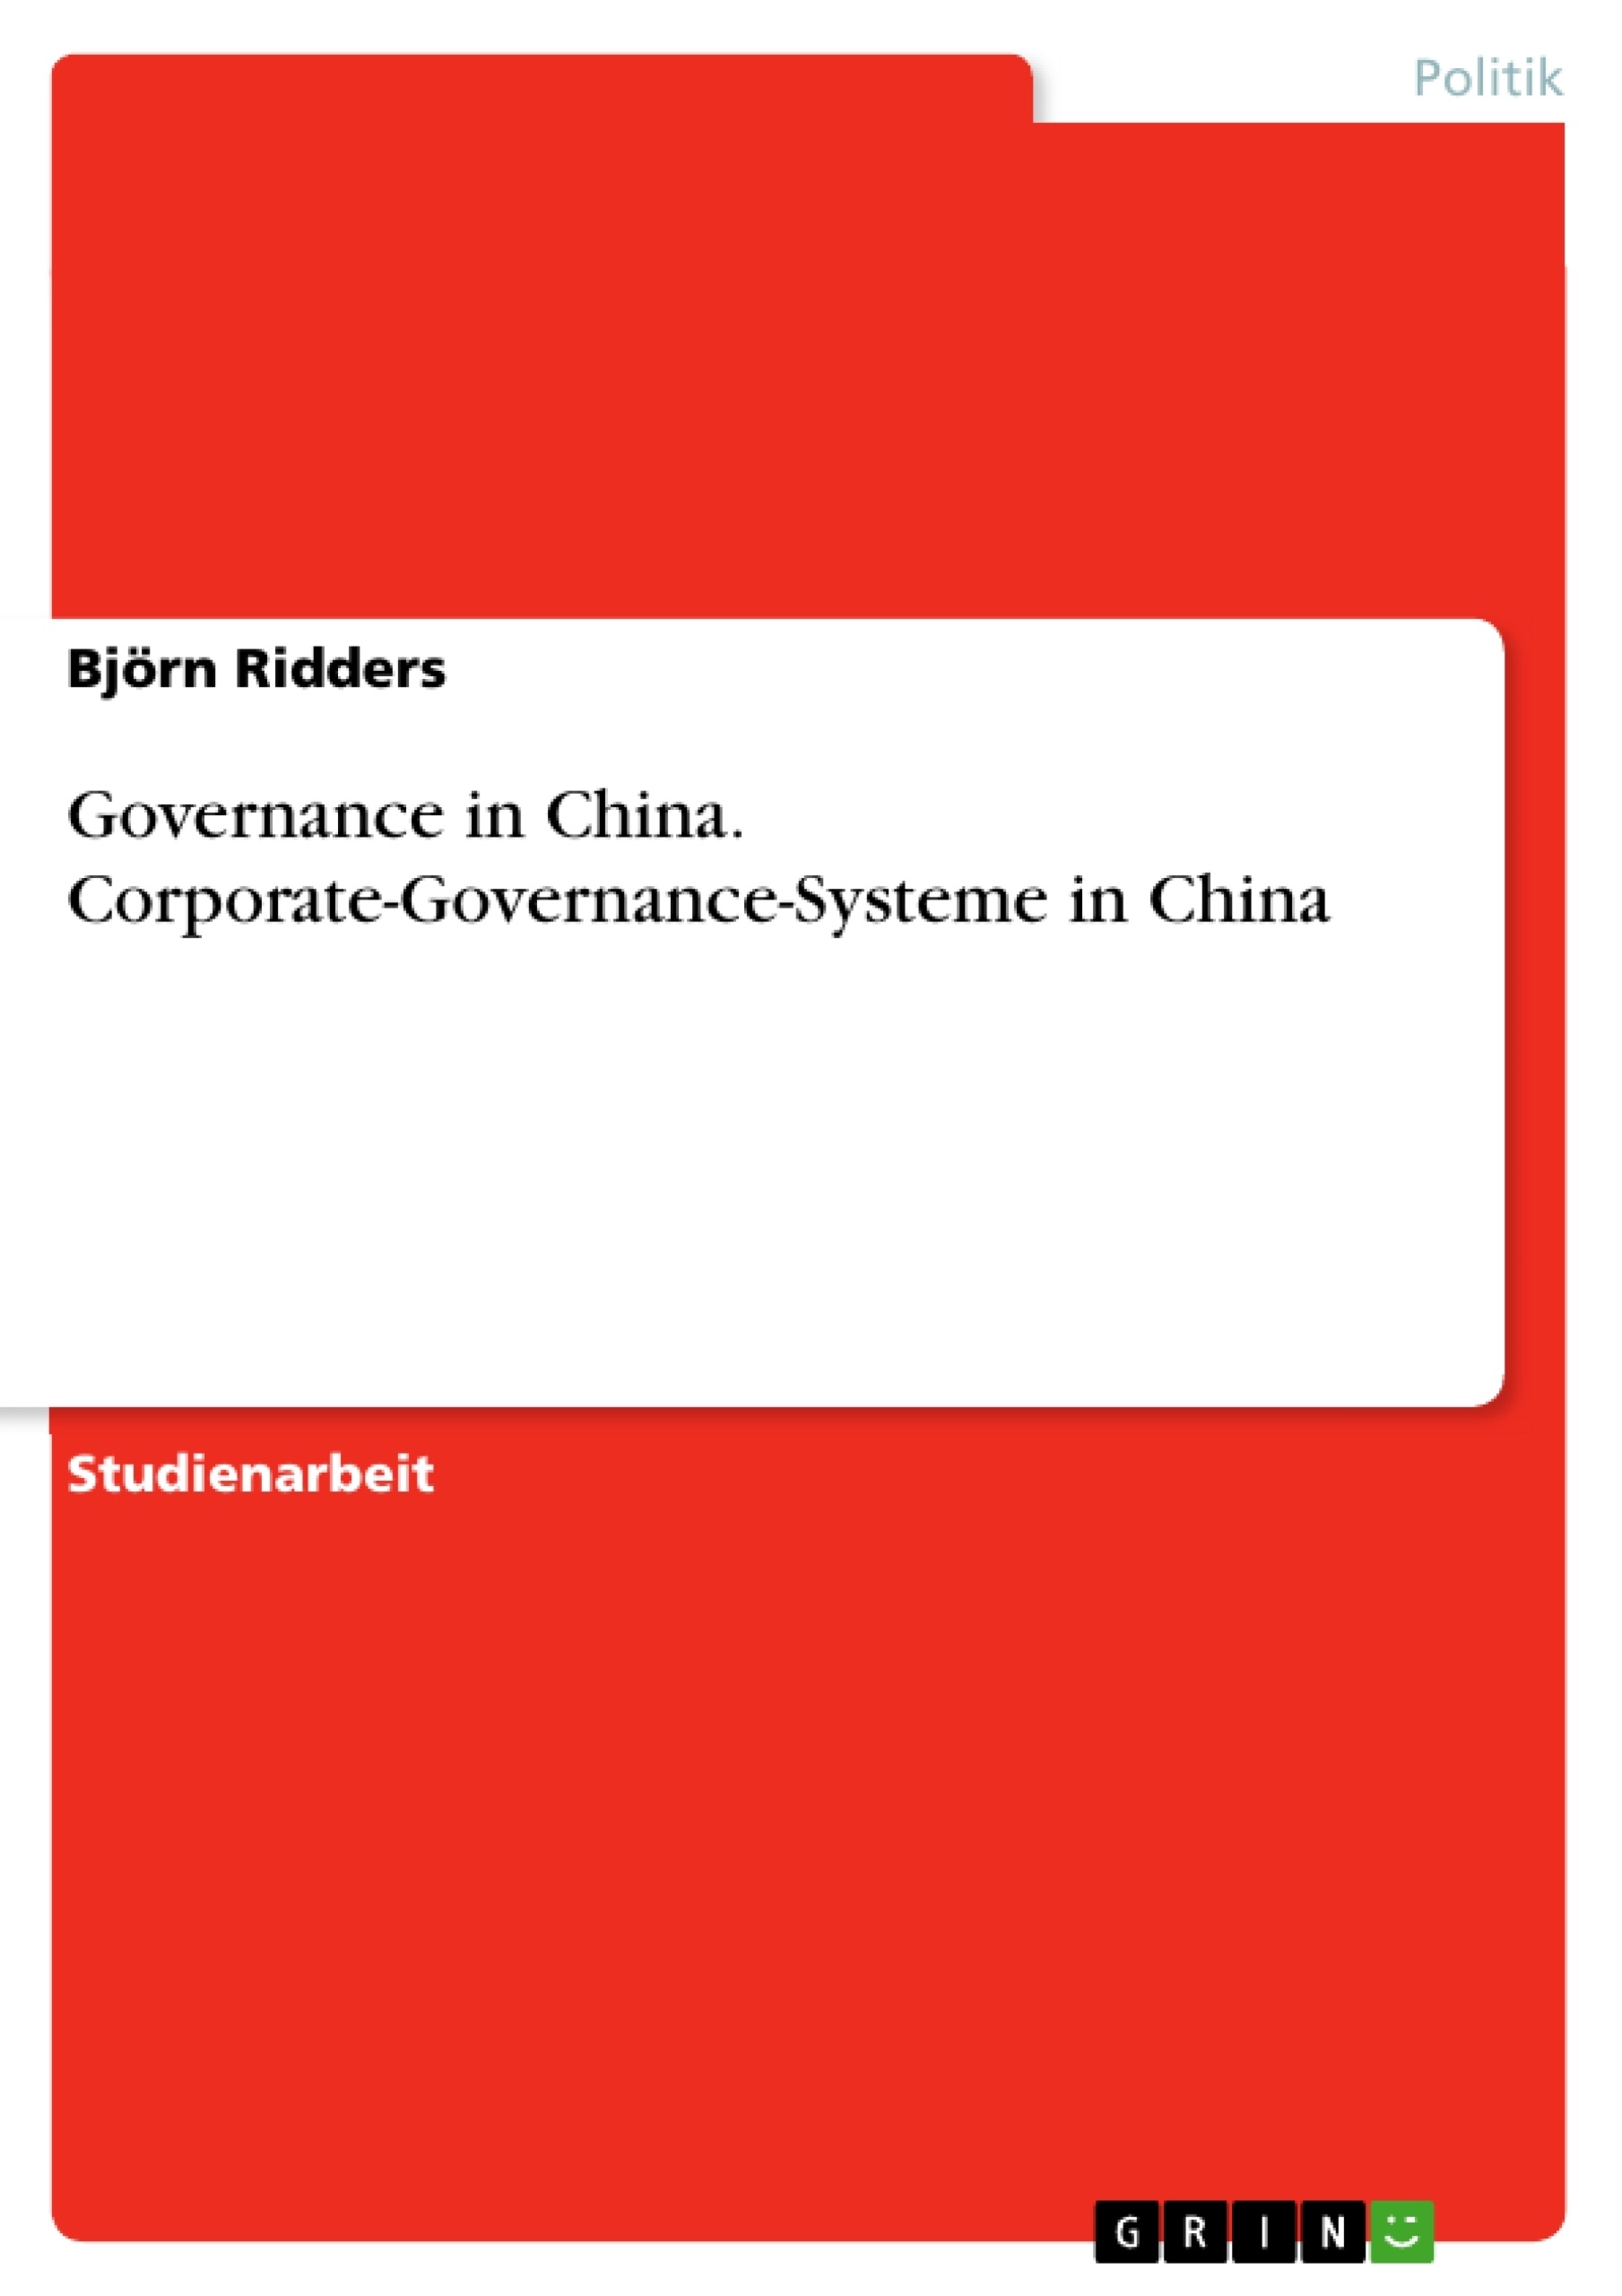 Titre: Governance in China. Corporate-Governance-Systeme in China